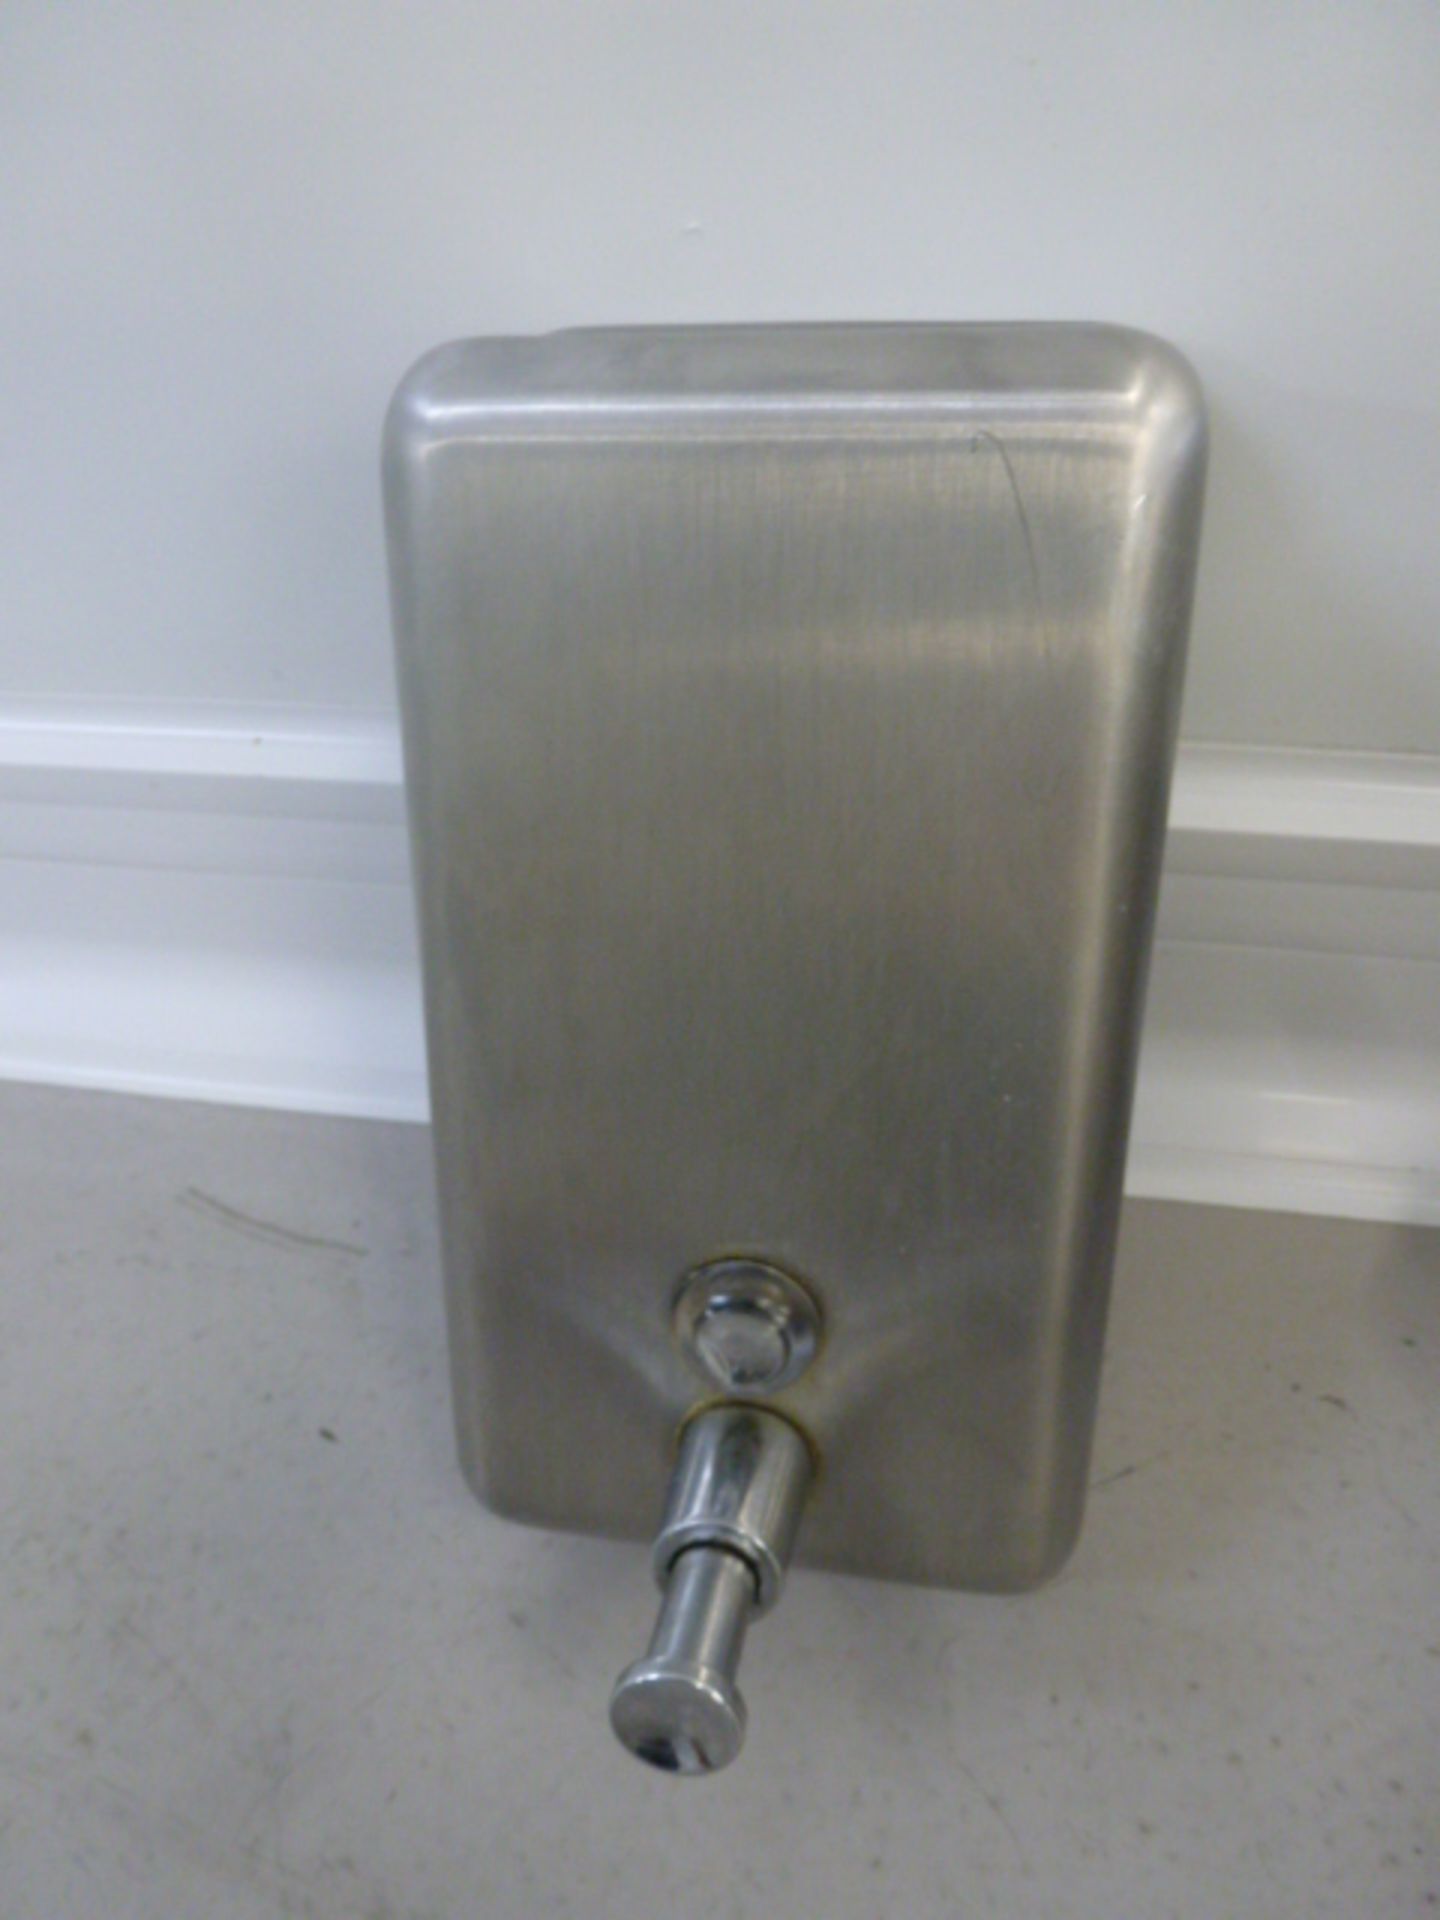 Stainless Steel Knee Operated Hand Wash Basin with Soap Dispenser. - Bild 3 aus 3